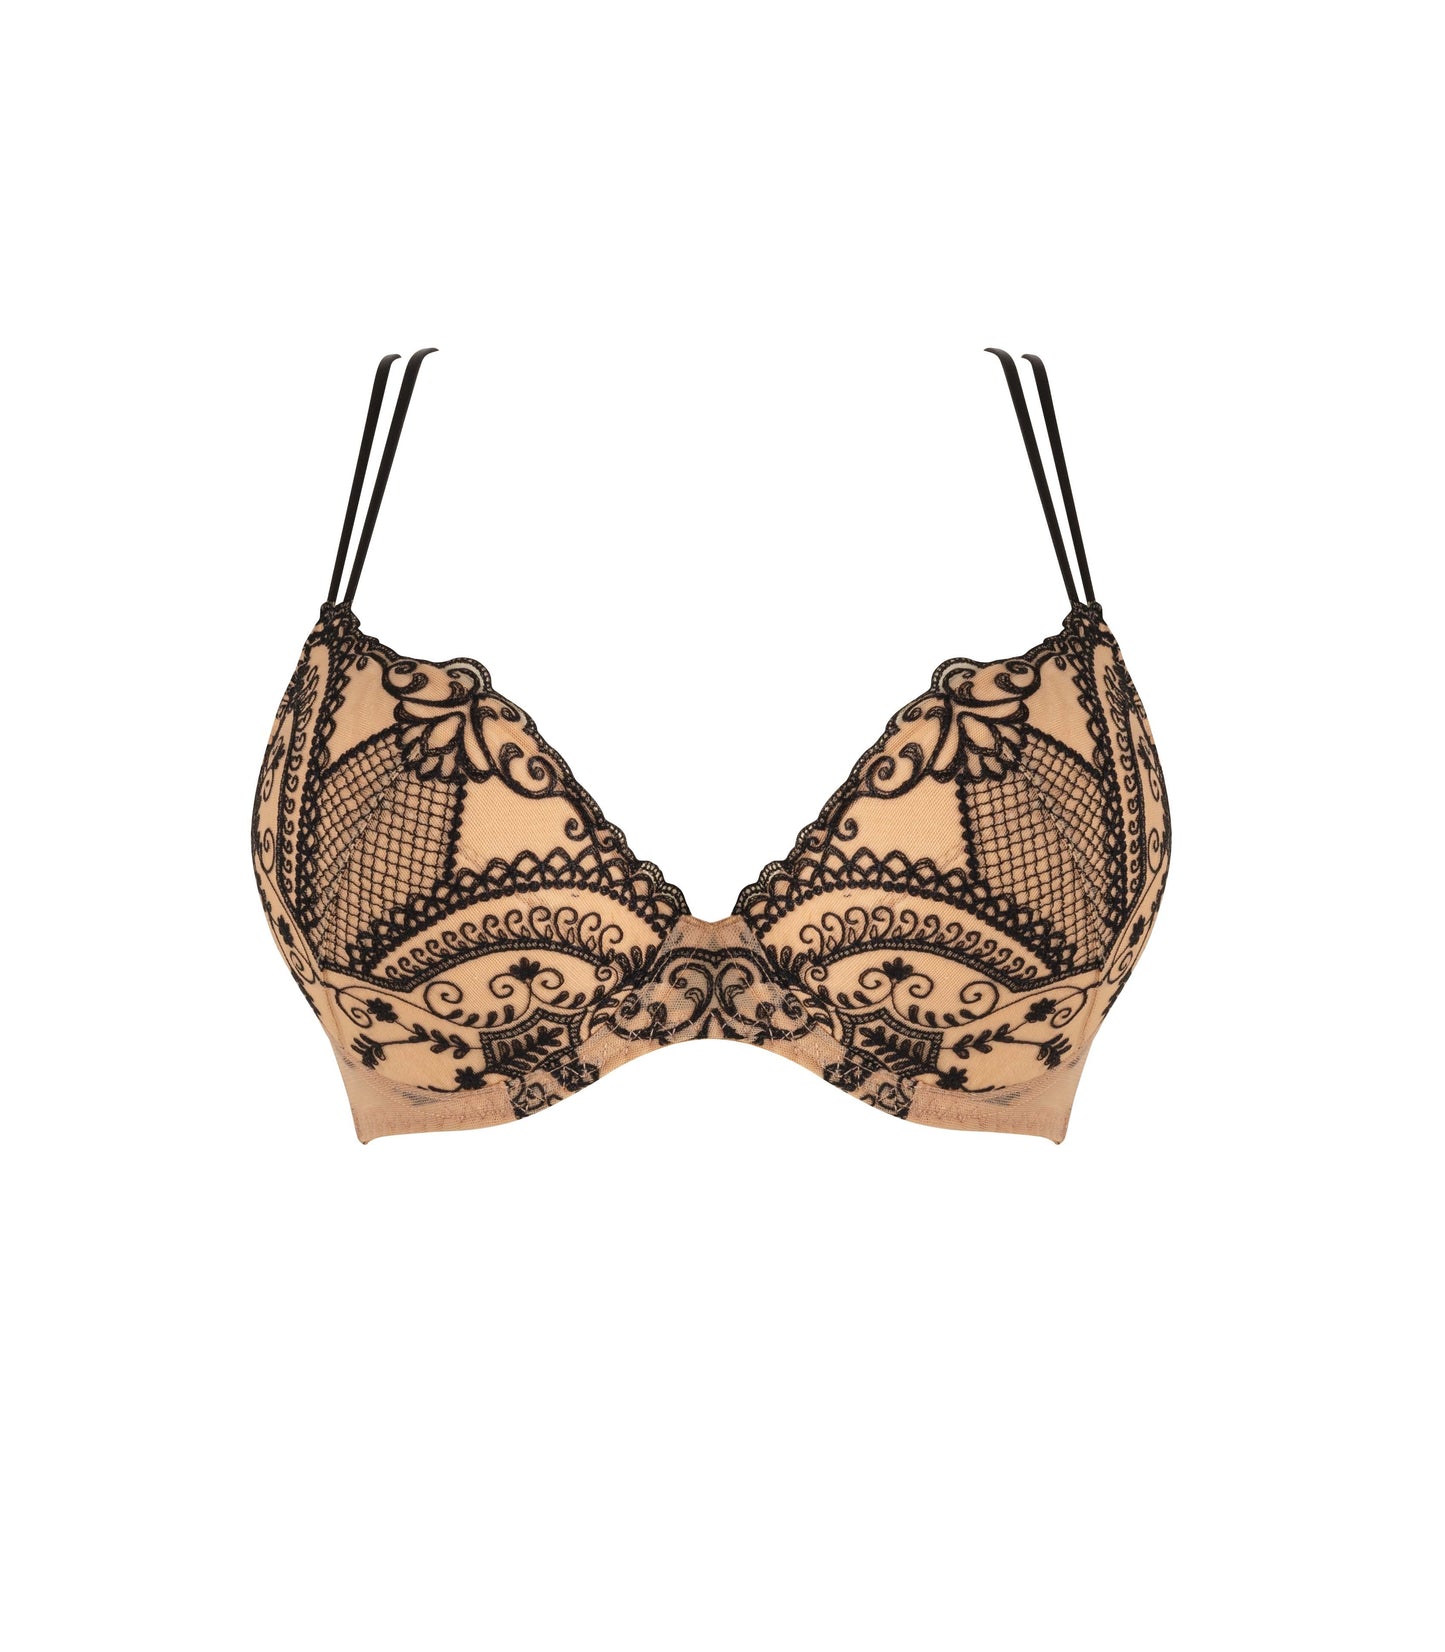 Sophisticated and luxuriously embroidered push-up bra from the Kant line by Louisa Bracq from France. at DiModa Lingerie Toronto.